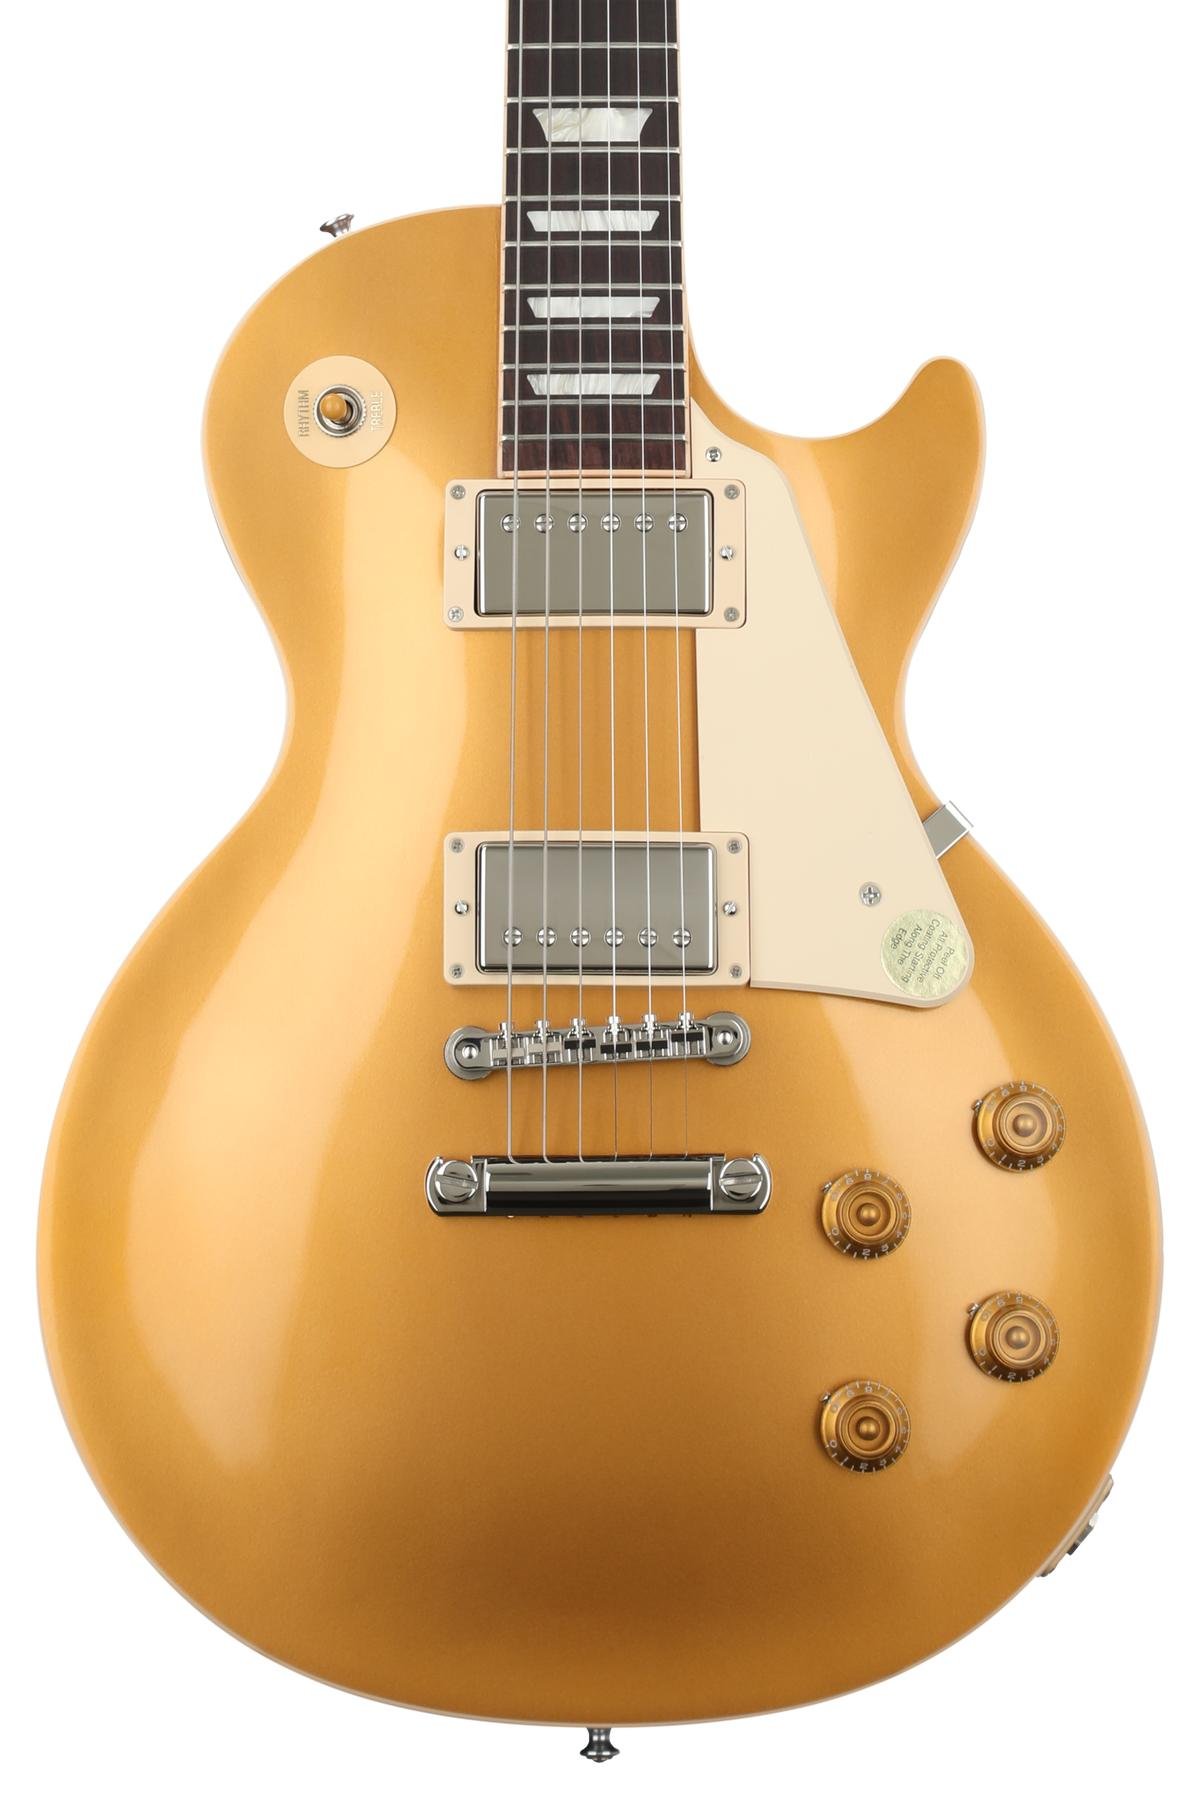 Gibson Les Paul Standard '50s Electric Guitar - Gold Top | Sweetwater